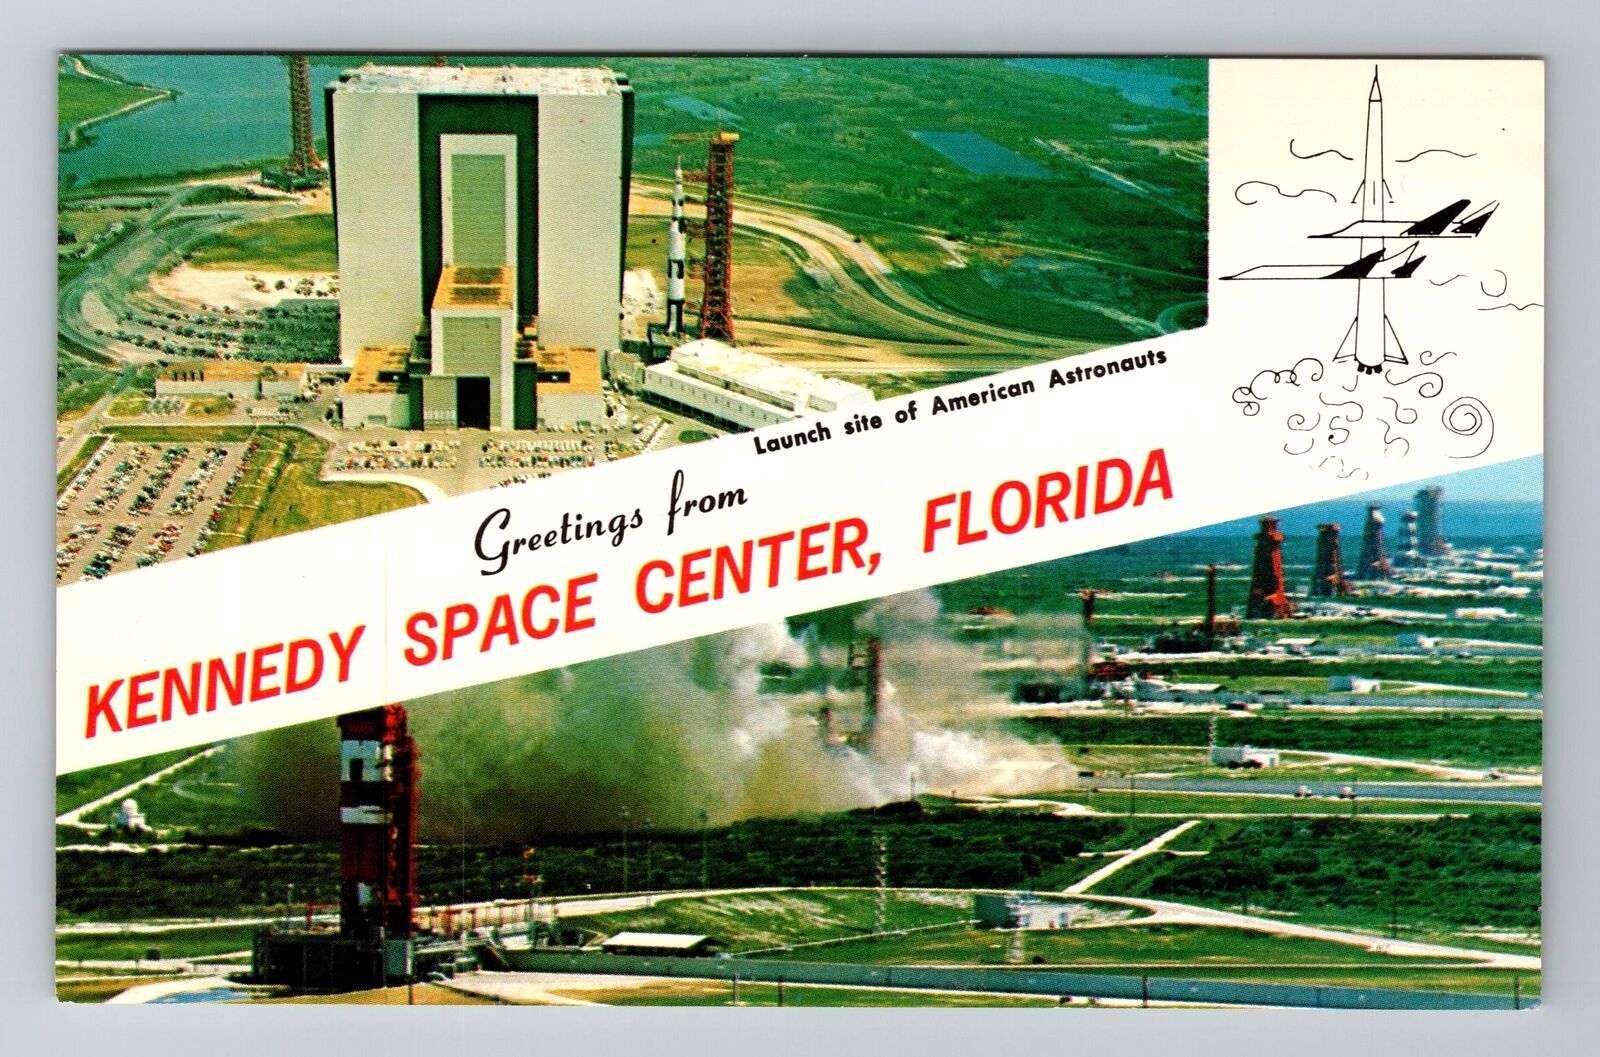 Kennedy Space Center FL-Florida, Scenic Banner Greetings, Vintage Postcard